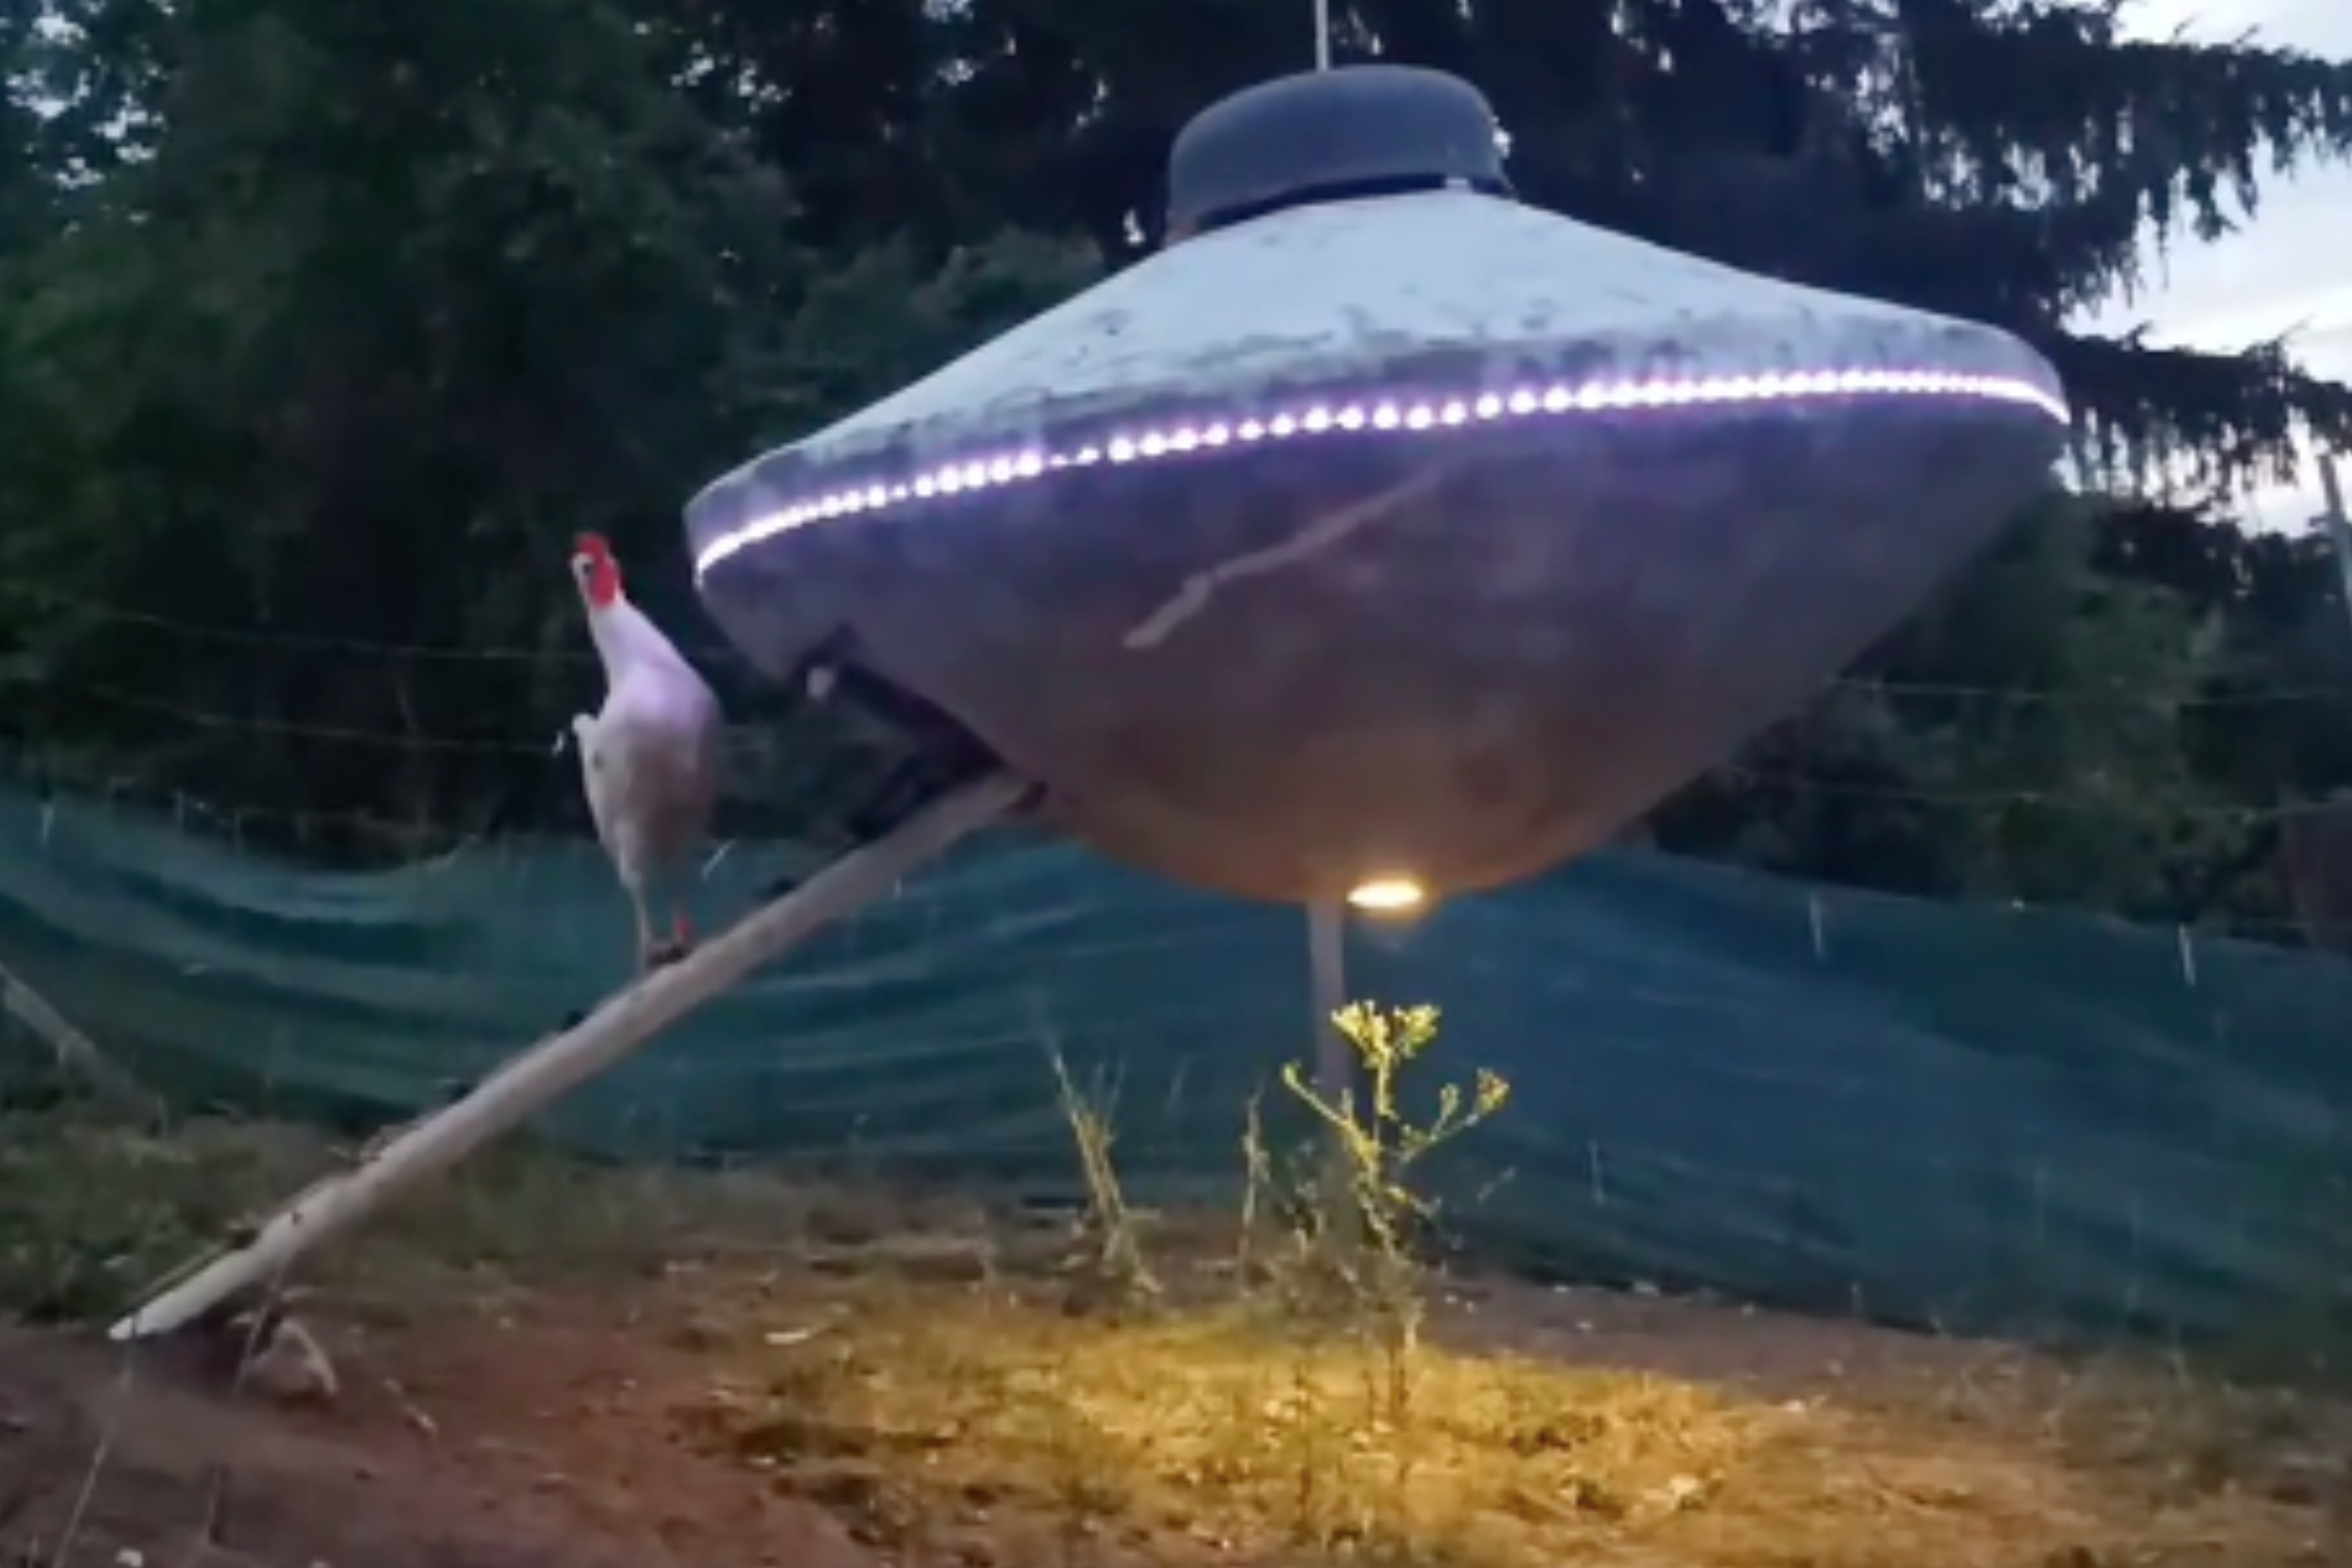 Watch Chickens Returning to Their UFO Coop in Bizarre Video